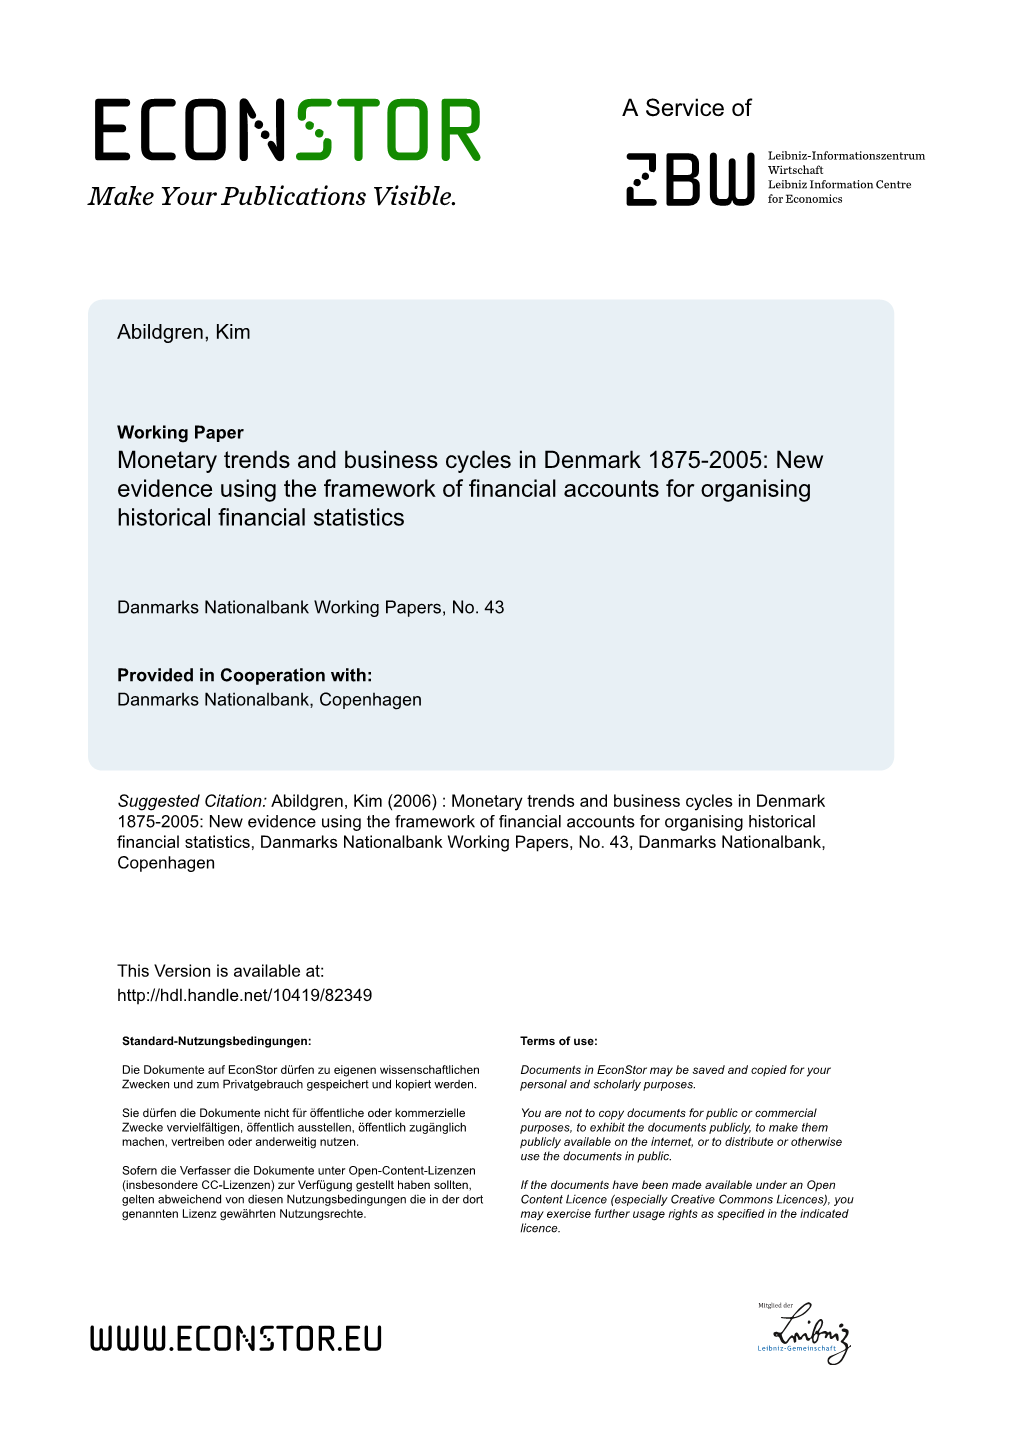 Monetary Trends and Business Cycles in Denmark 1875-2005: New Evidence Using the Framework of Financial Accounts for Organising Historical Financial Statistics